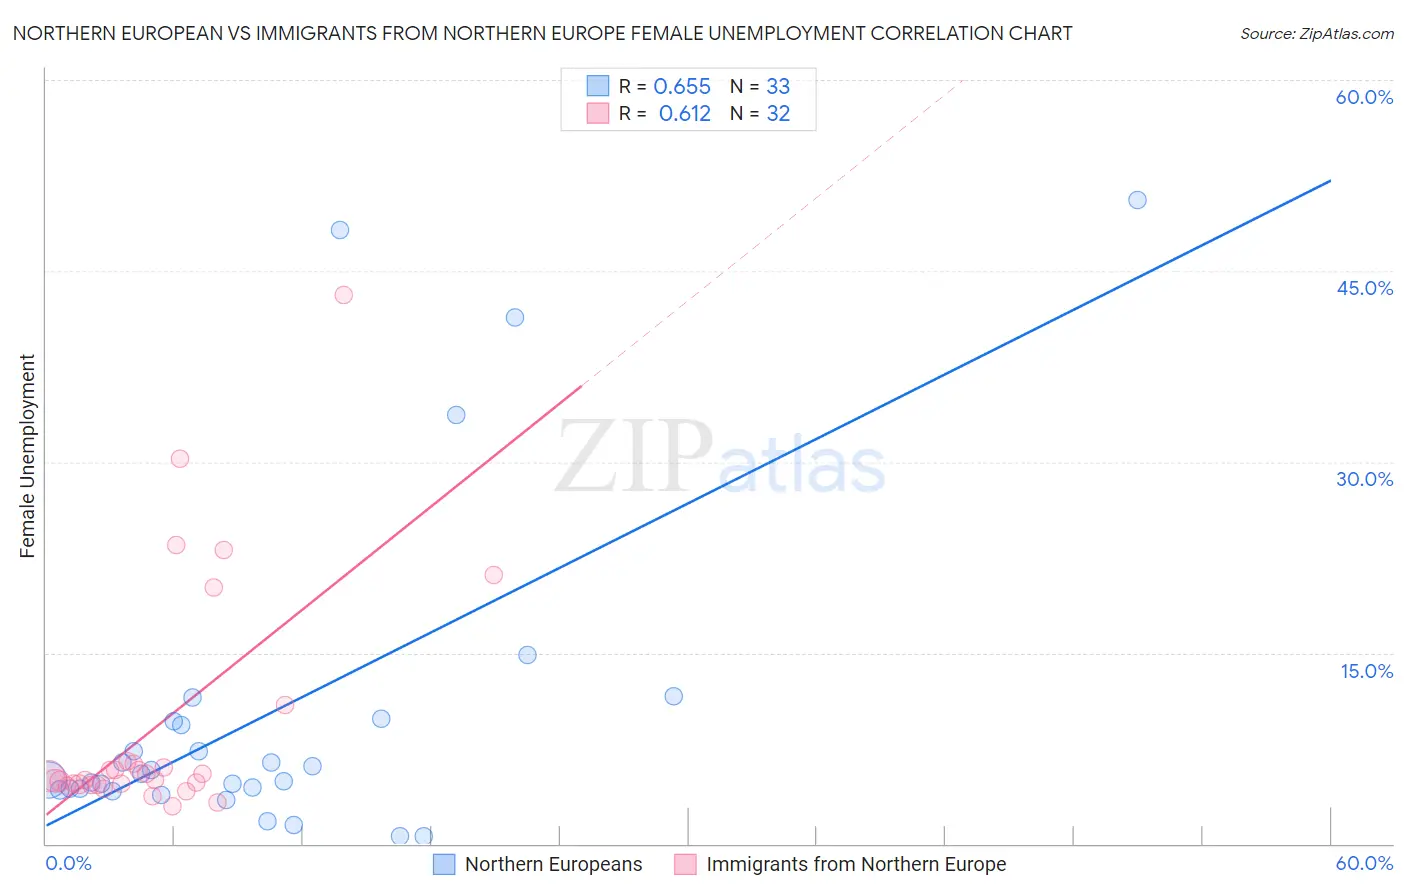 Northern European vs Immigrants from Northern Europe Female Unemployment